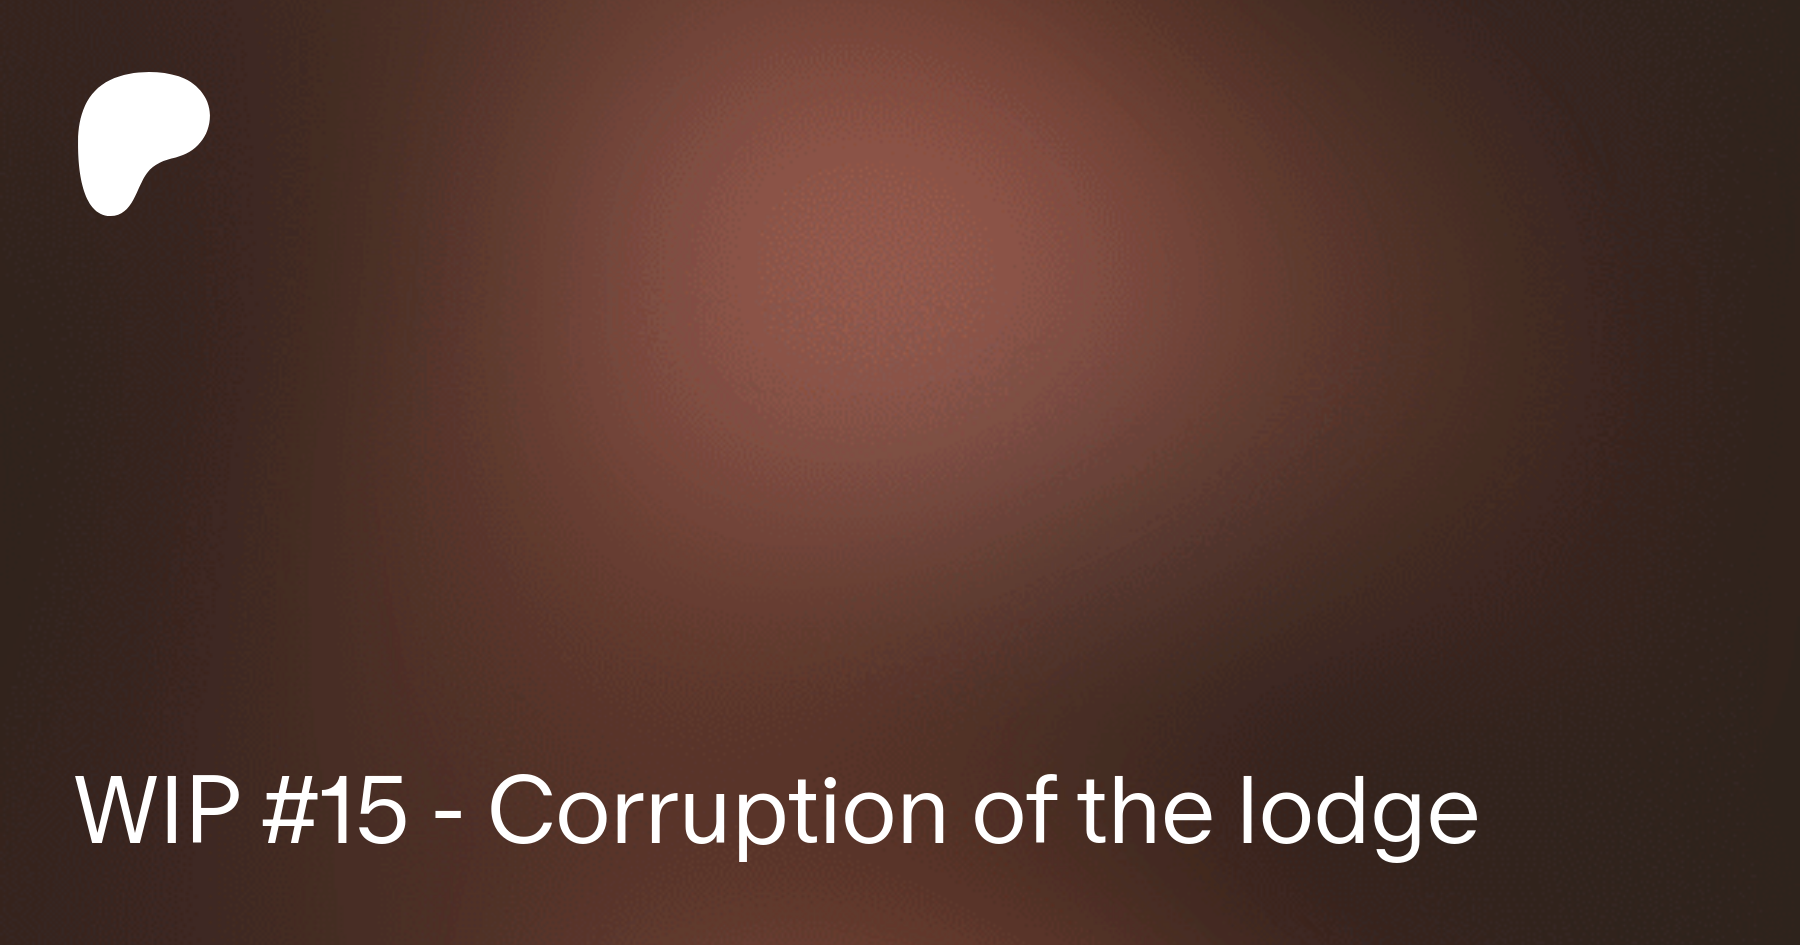 Corruption of the lodge